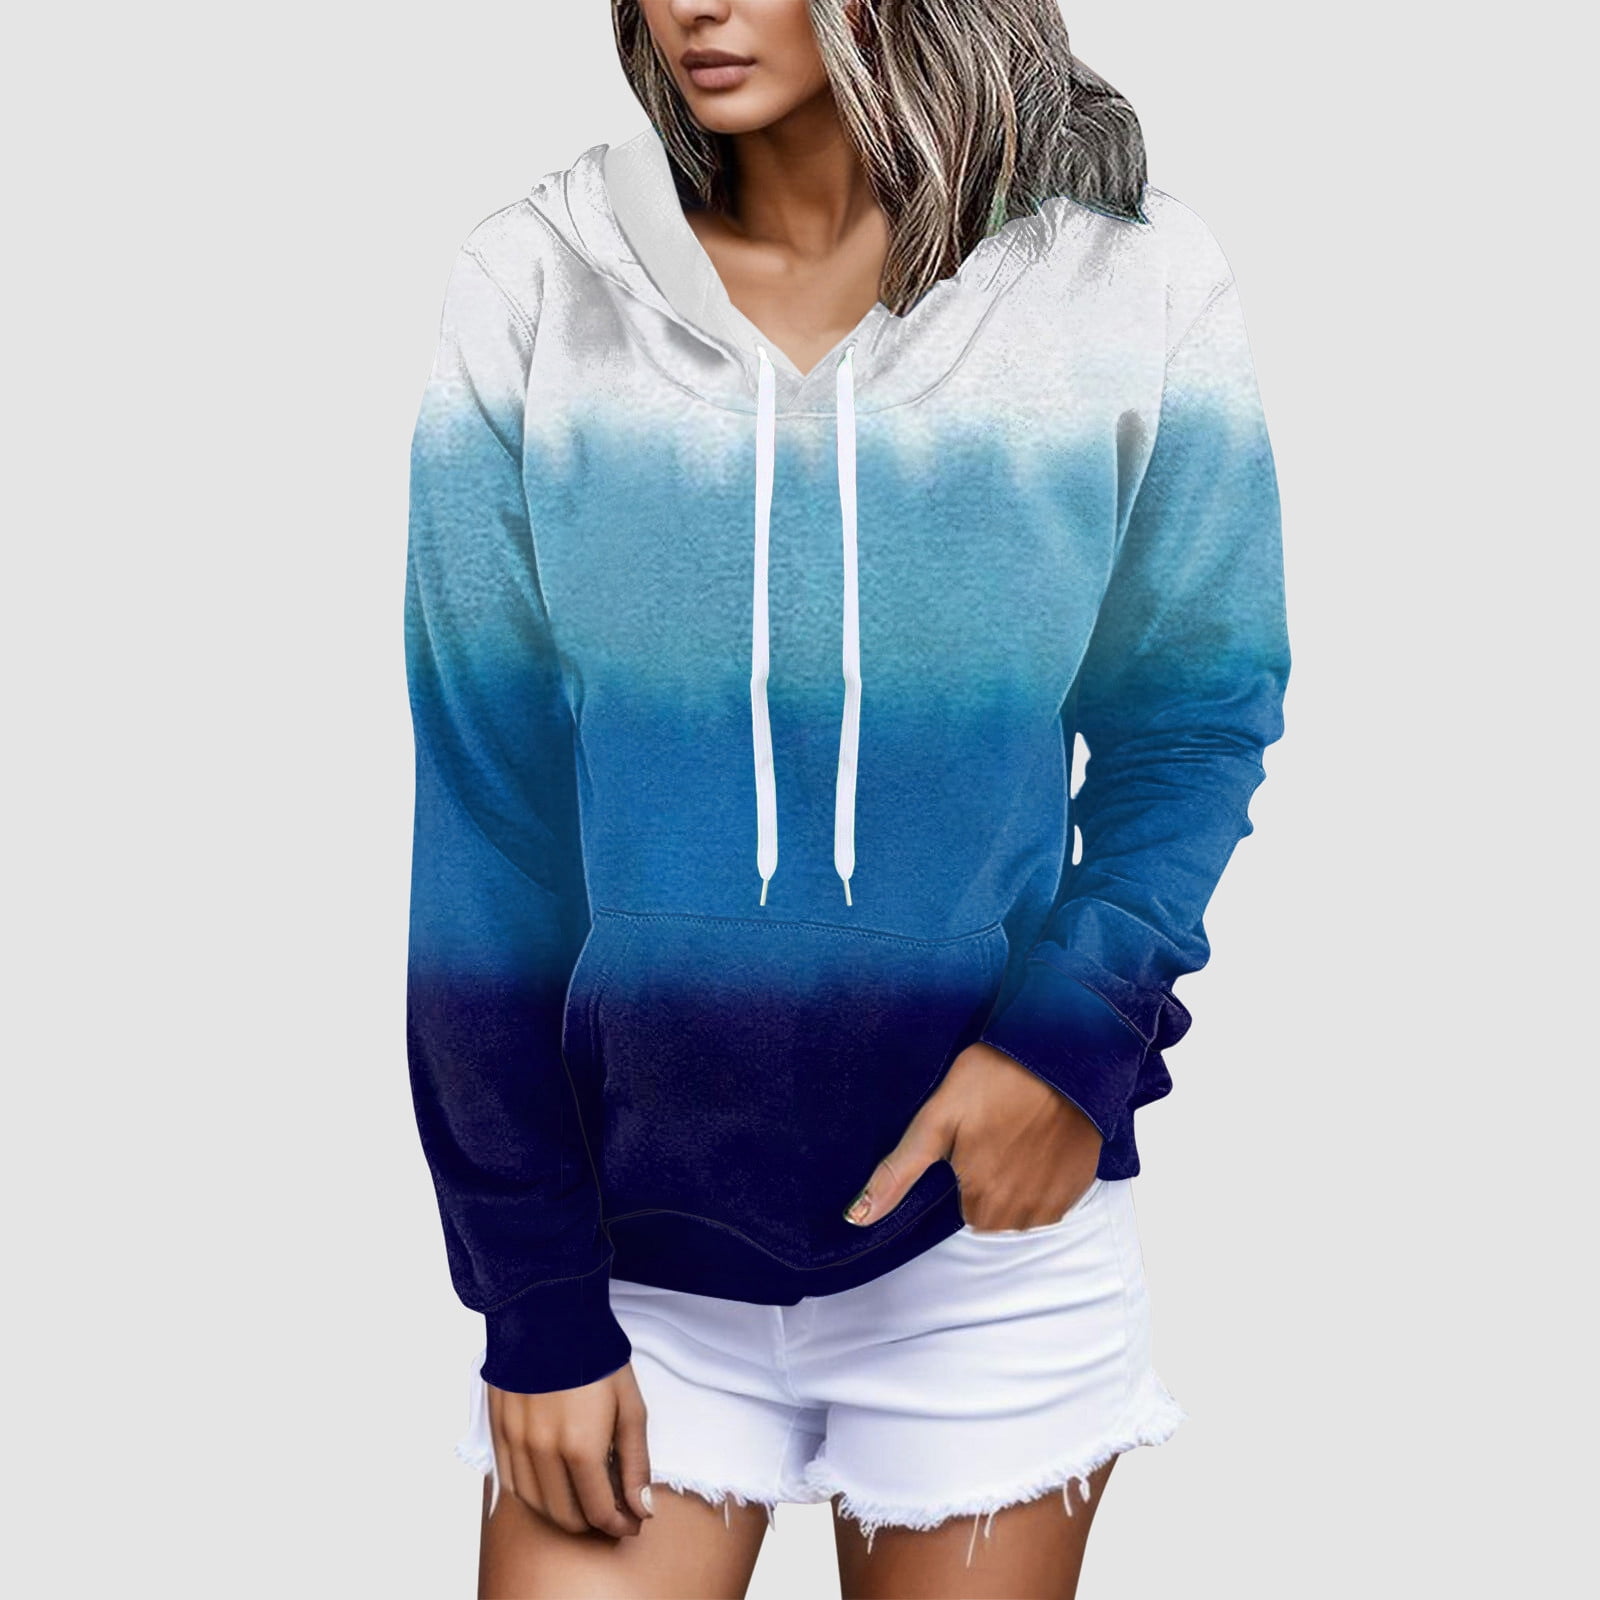 Lmtime Women' s Ombre Hoodie Sweatshirts Solid Color Long Sleeve Tie Dye  Pullover Casual Blouse Tops Loose Sweatshirt with Pocket Blue M